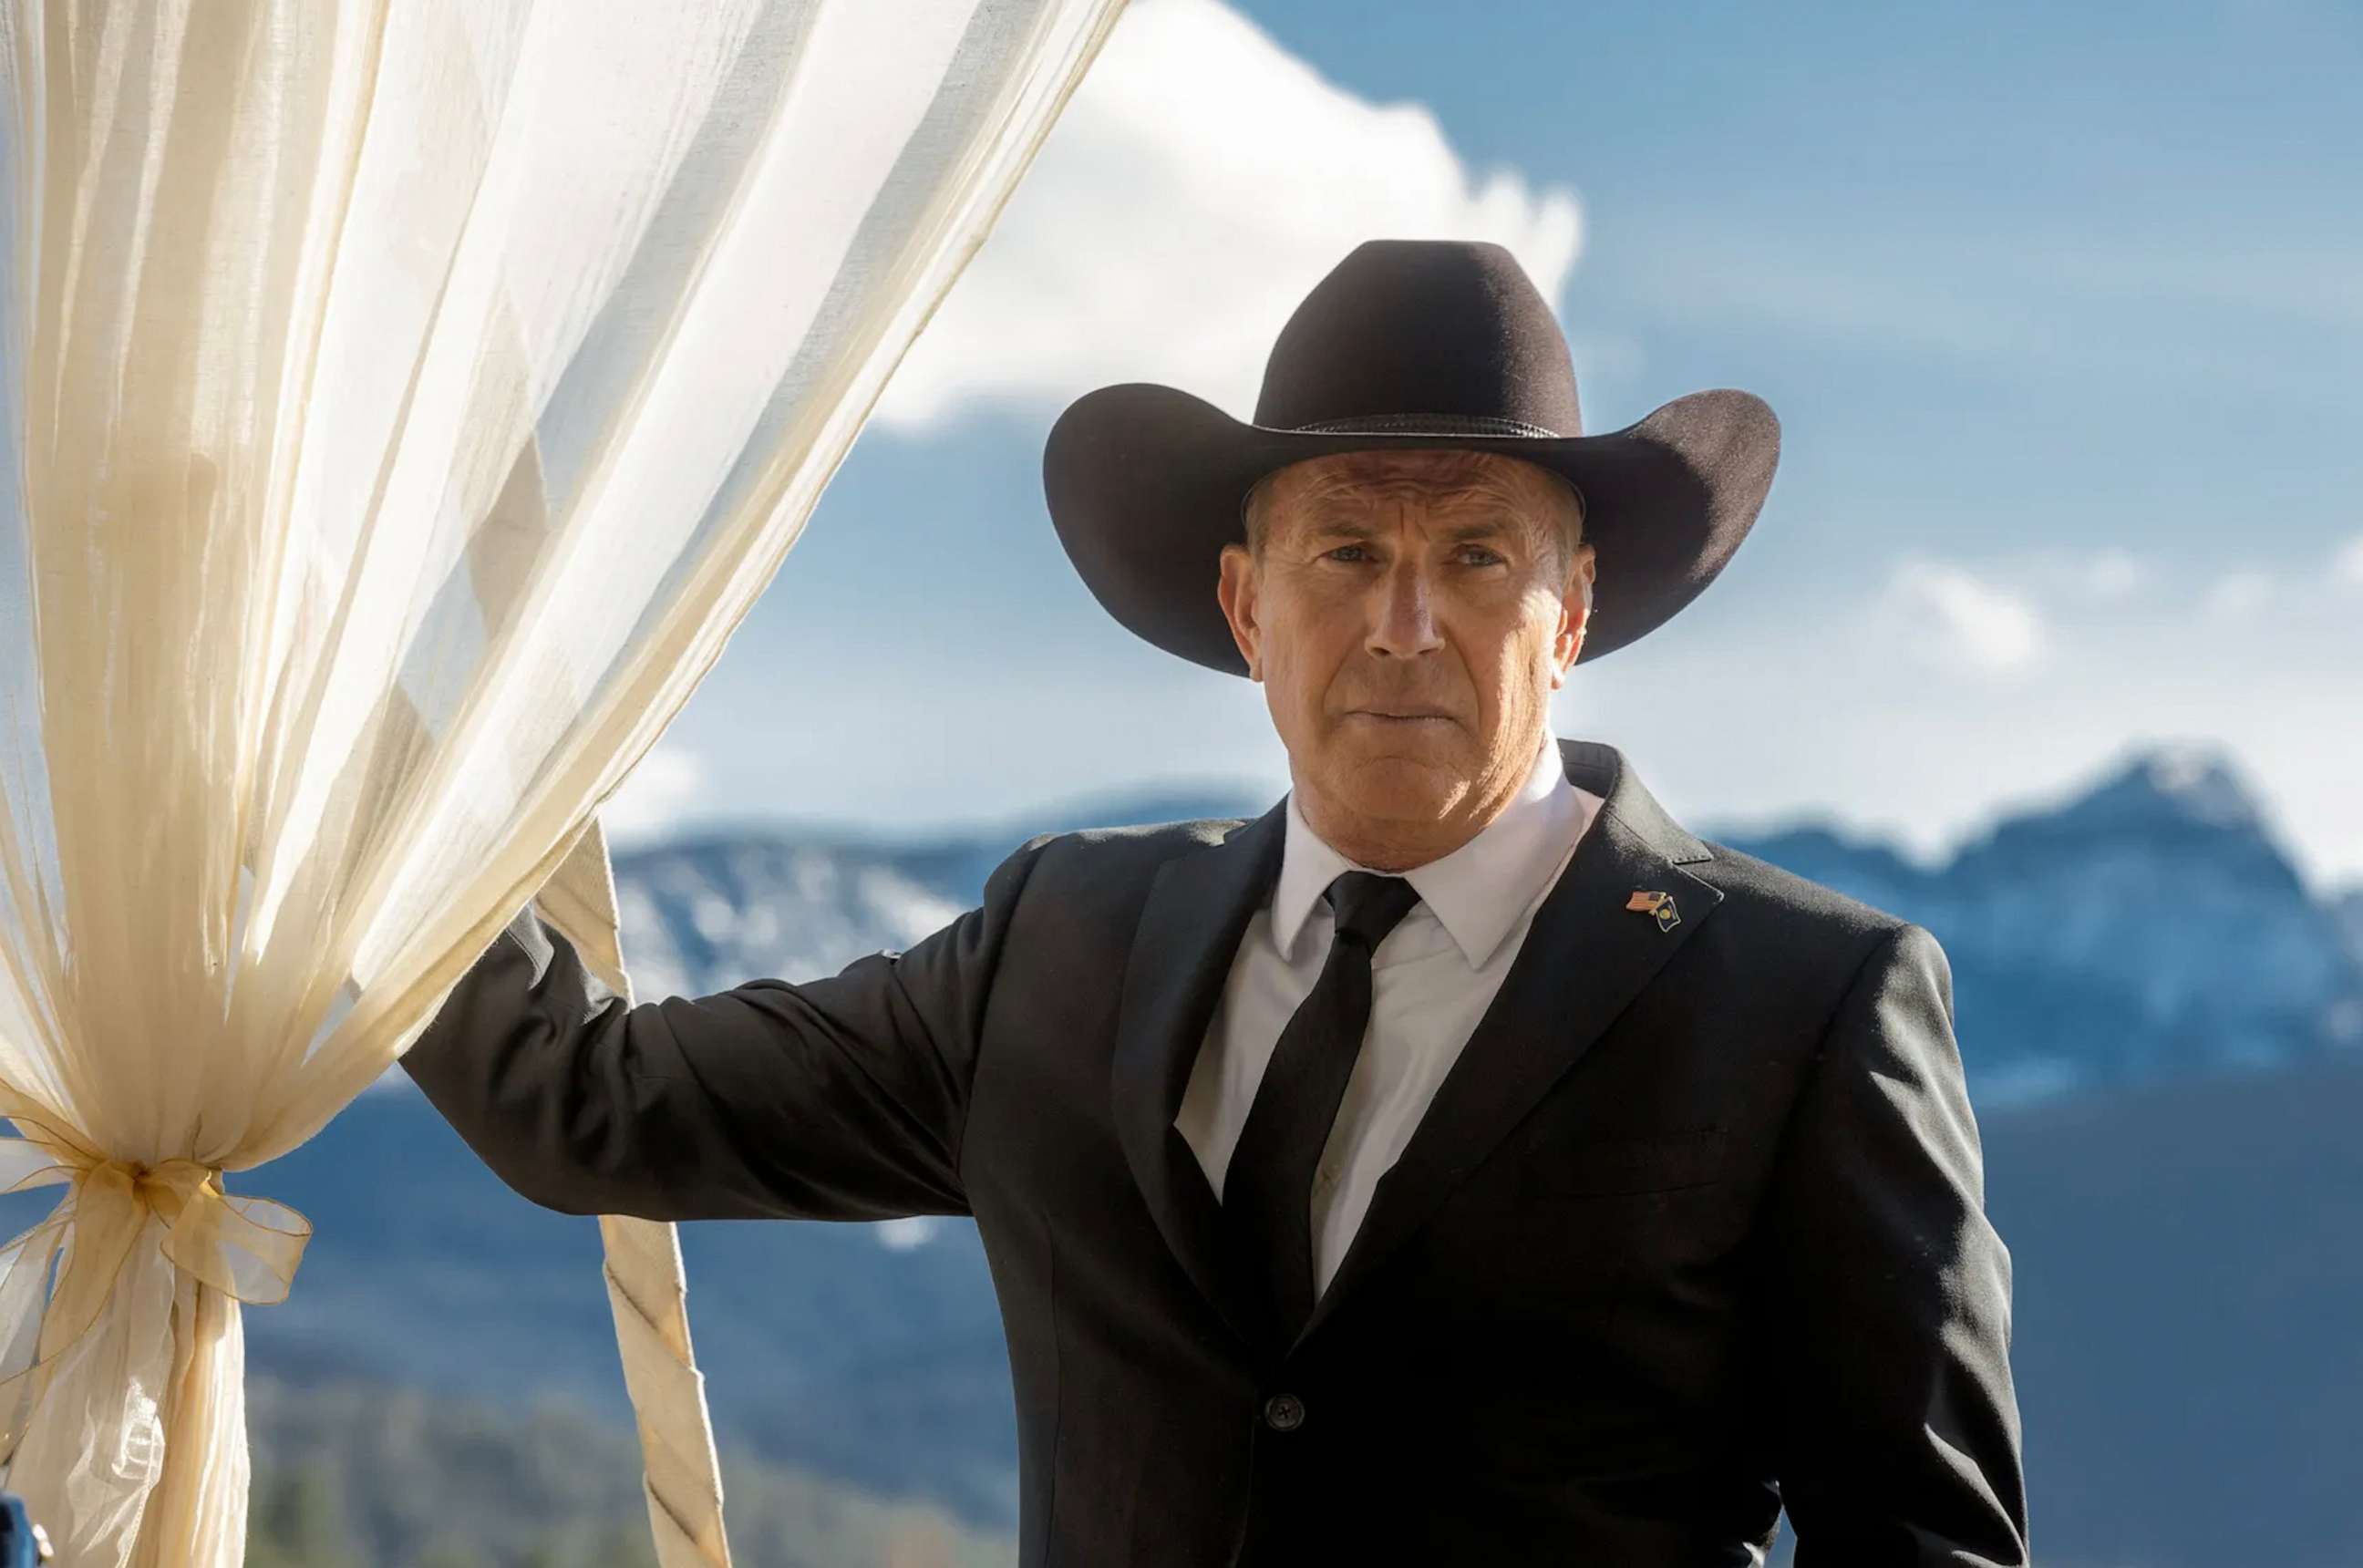 PHOTO: Kevin Costner in "Yellowstone."